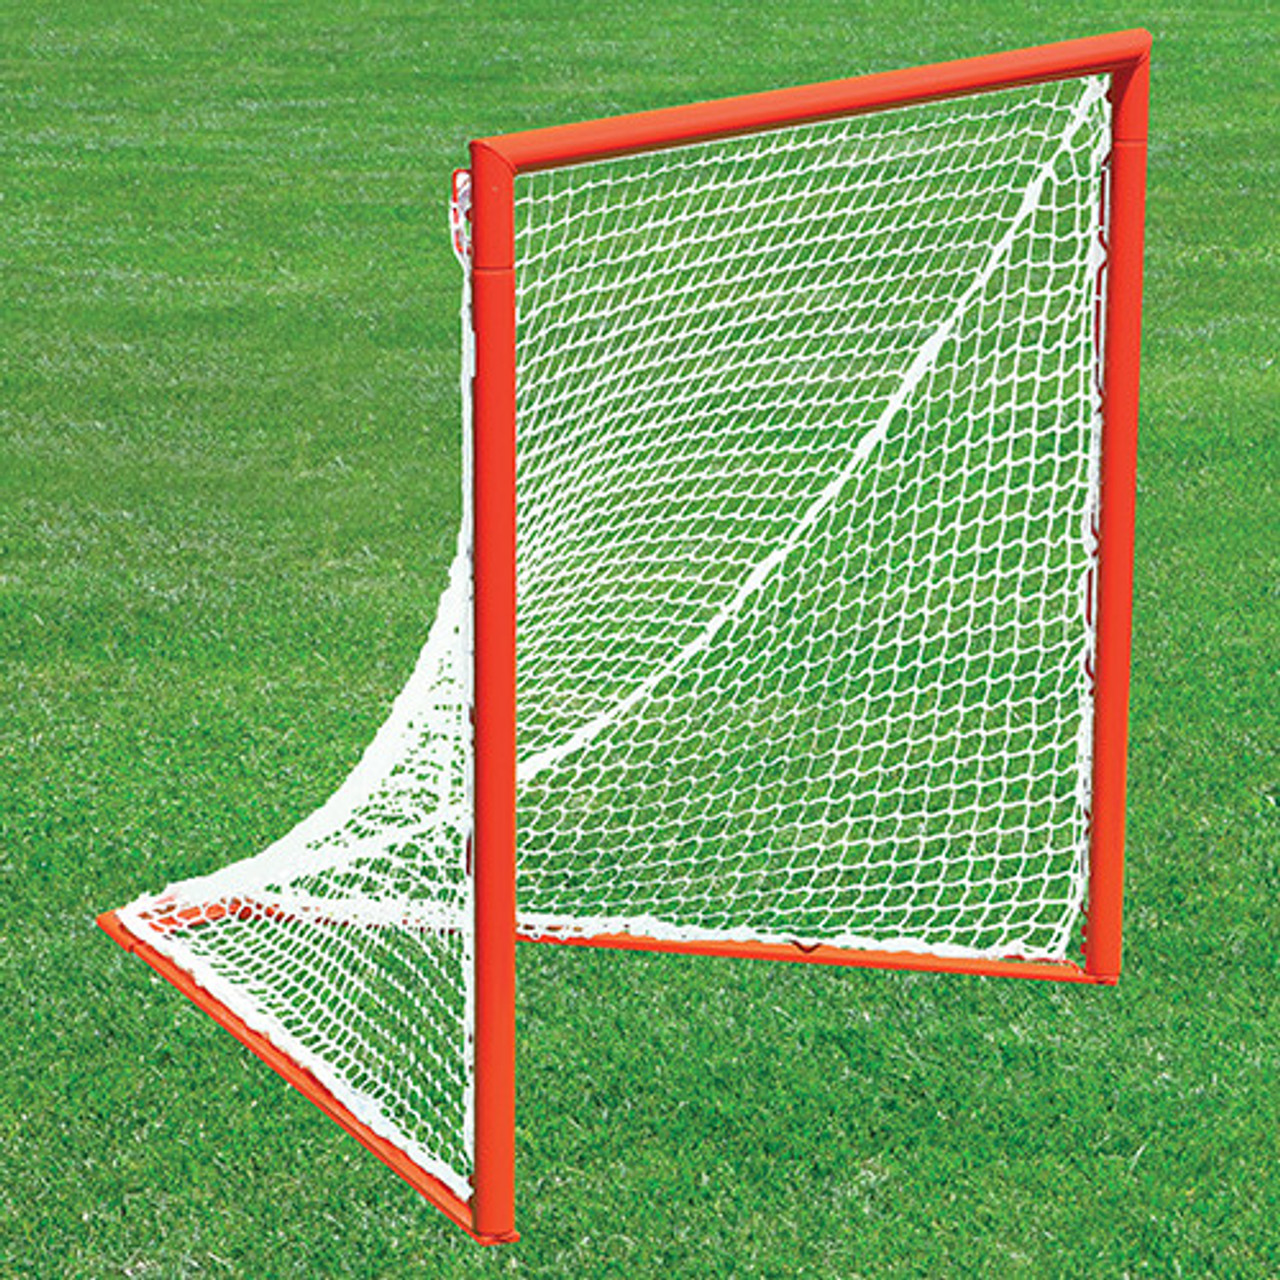 Official Box Lacrosse Goal and Net